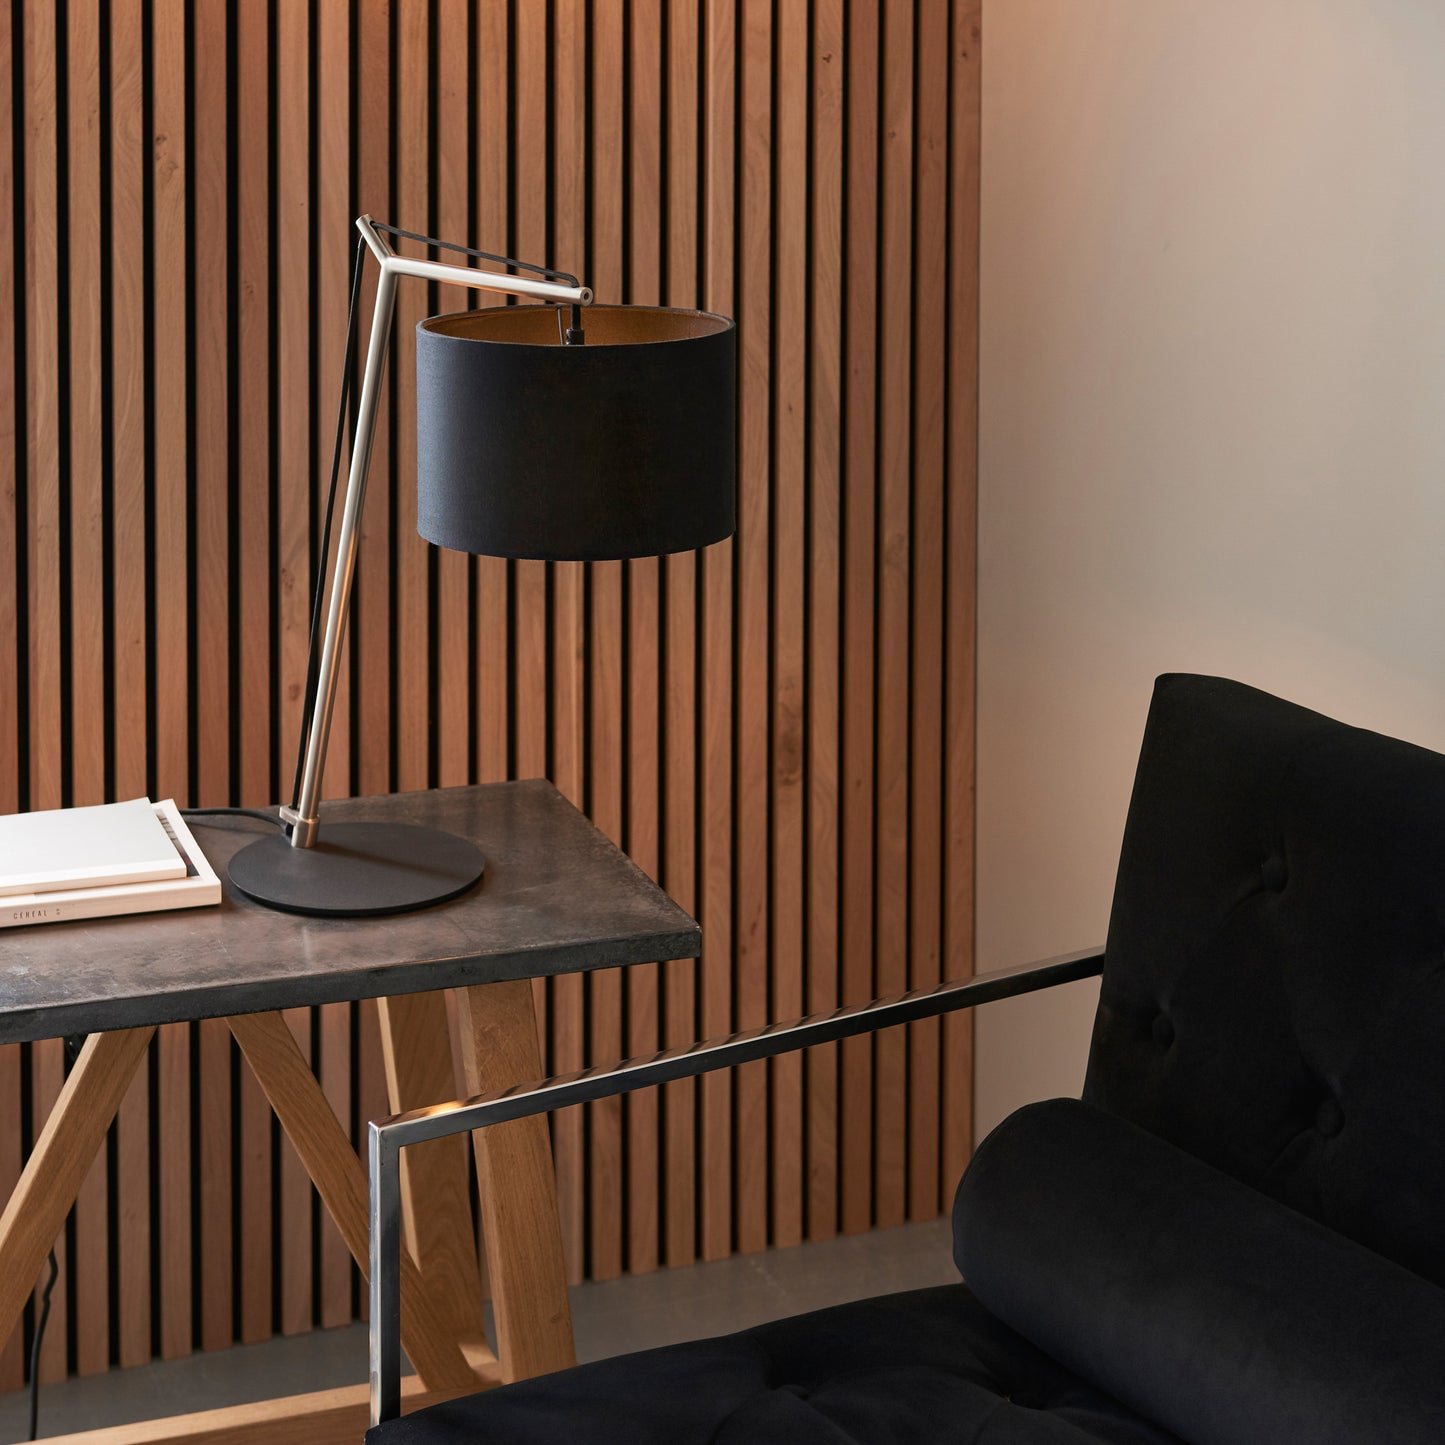 A black Buckland Table Lamp and antique Nickel chair and table in a room with wooden slats, perfect for home furniture and interior decor from Kikiathome.co.uk.